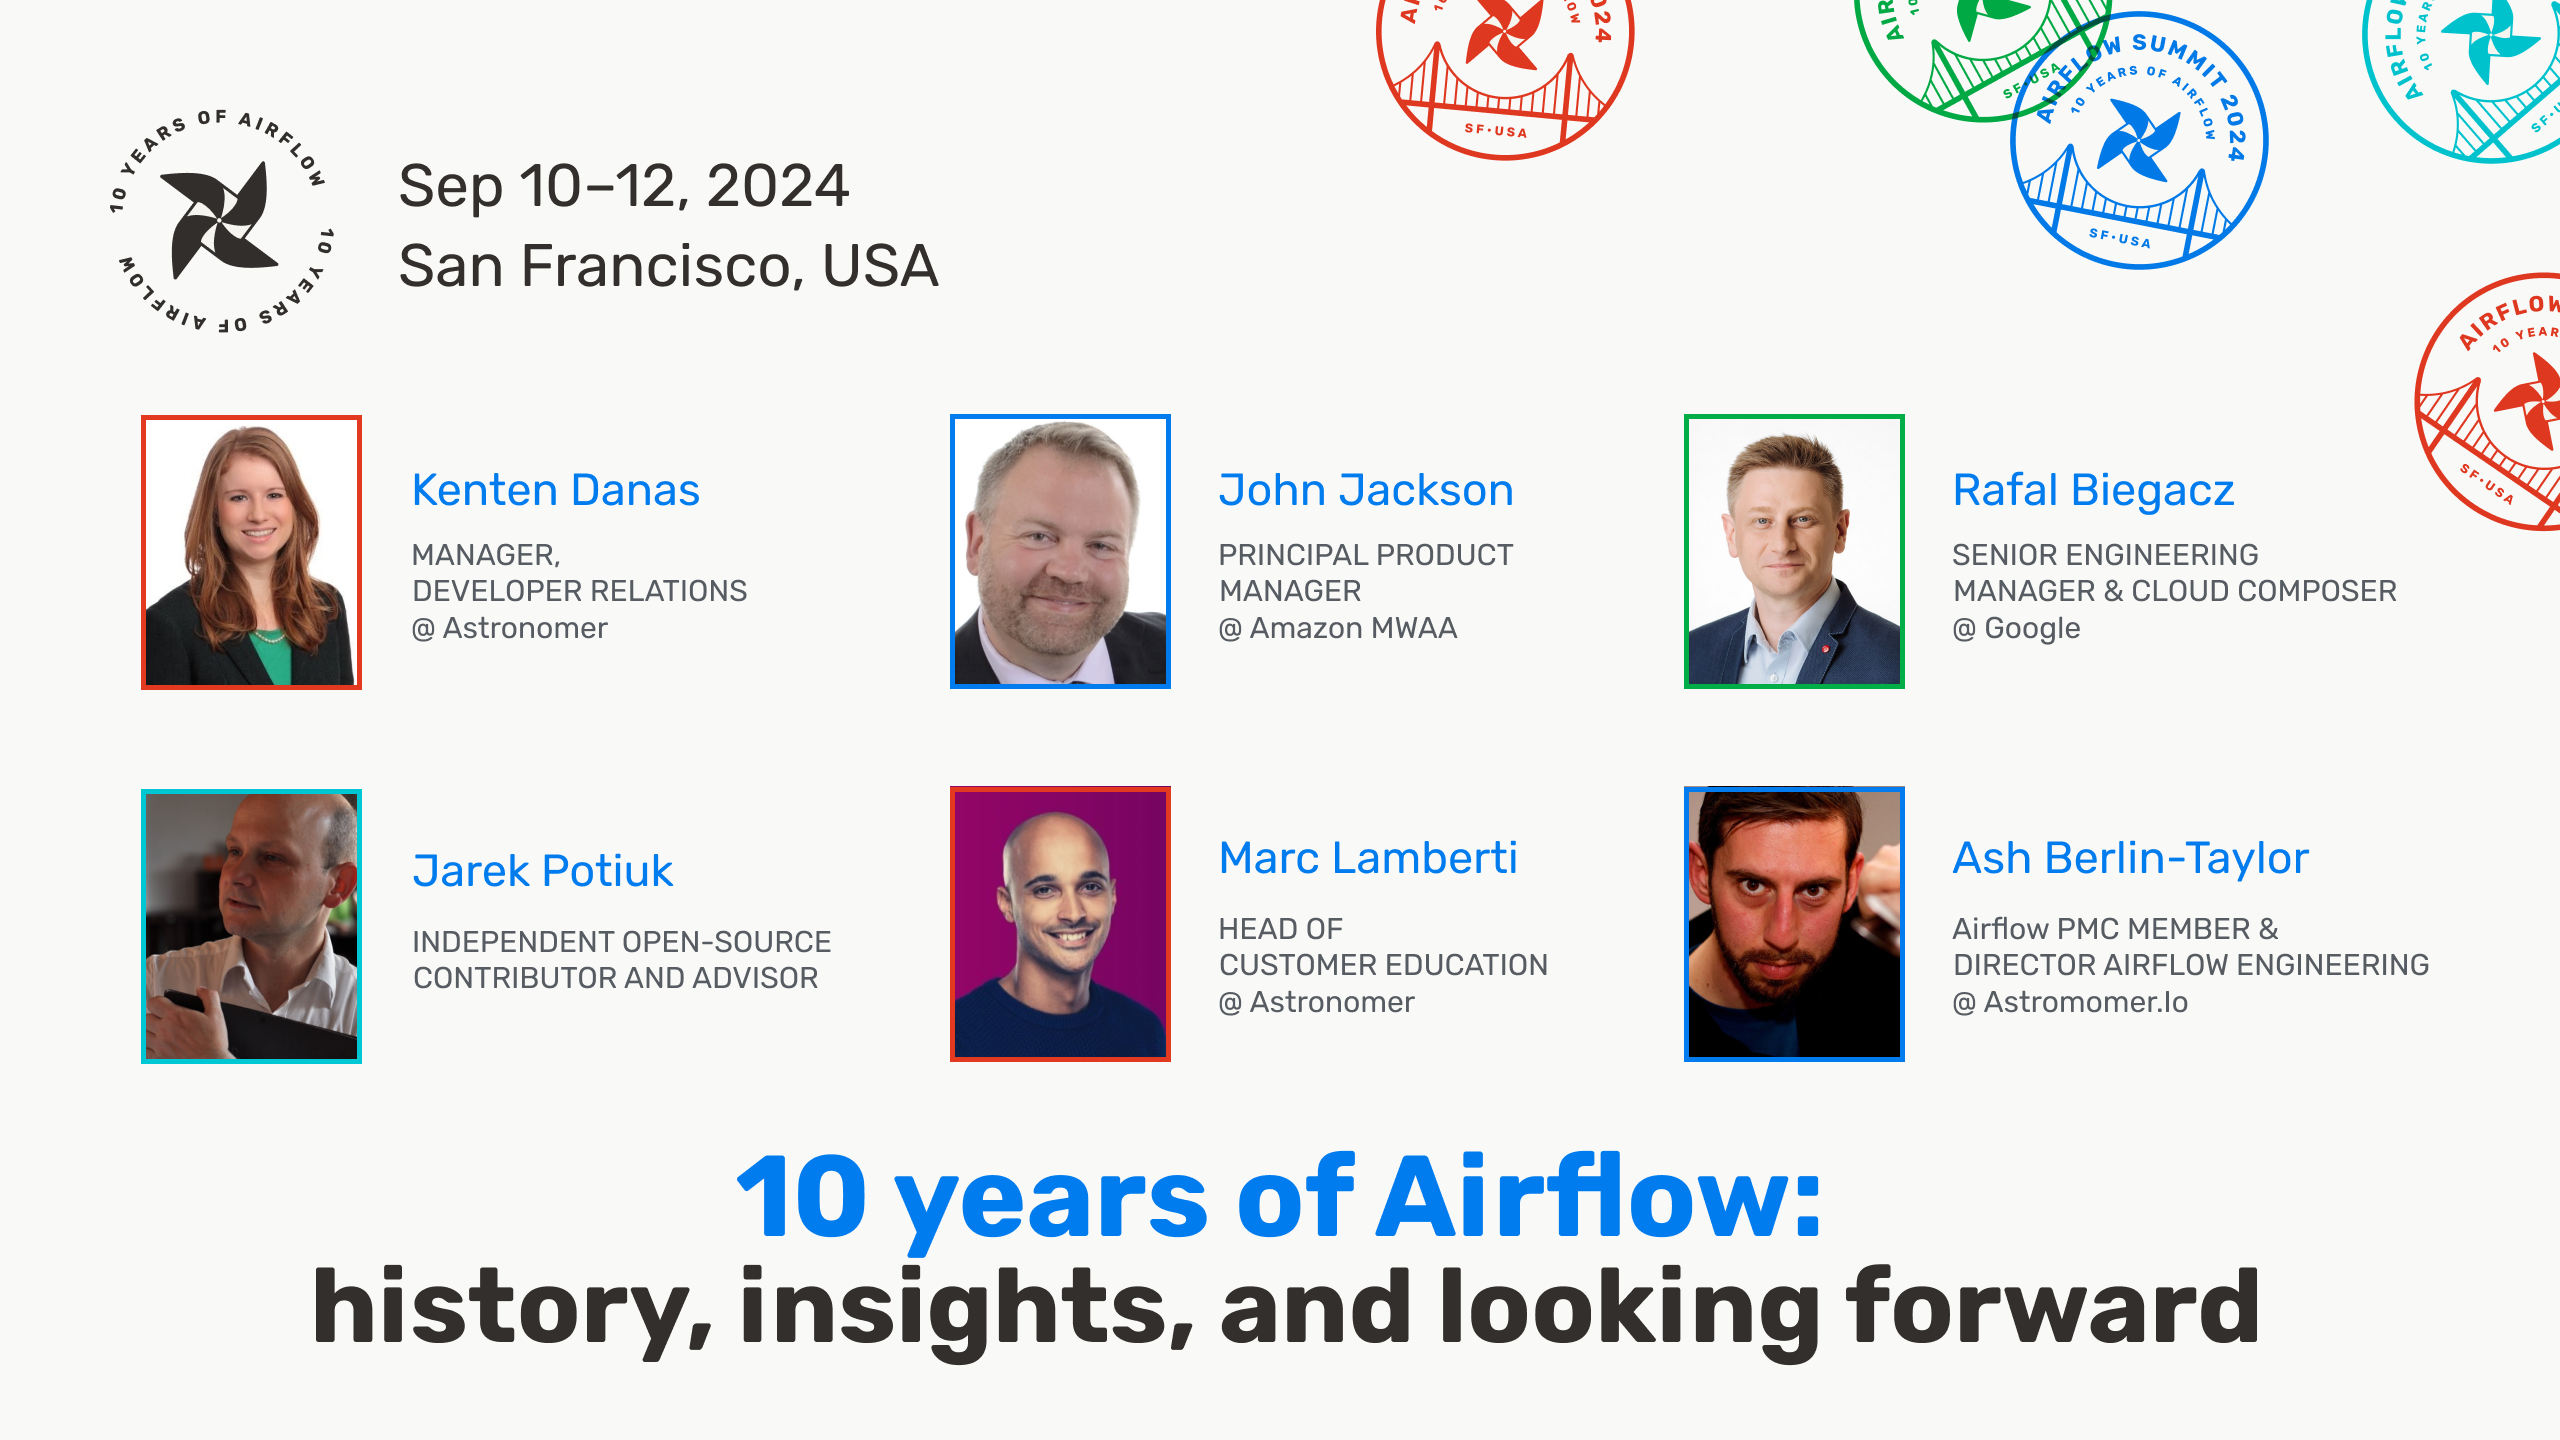 10 years of Airflow: history, insights, and looking forward